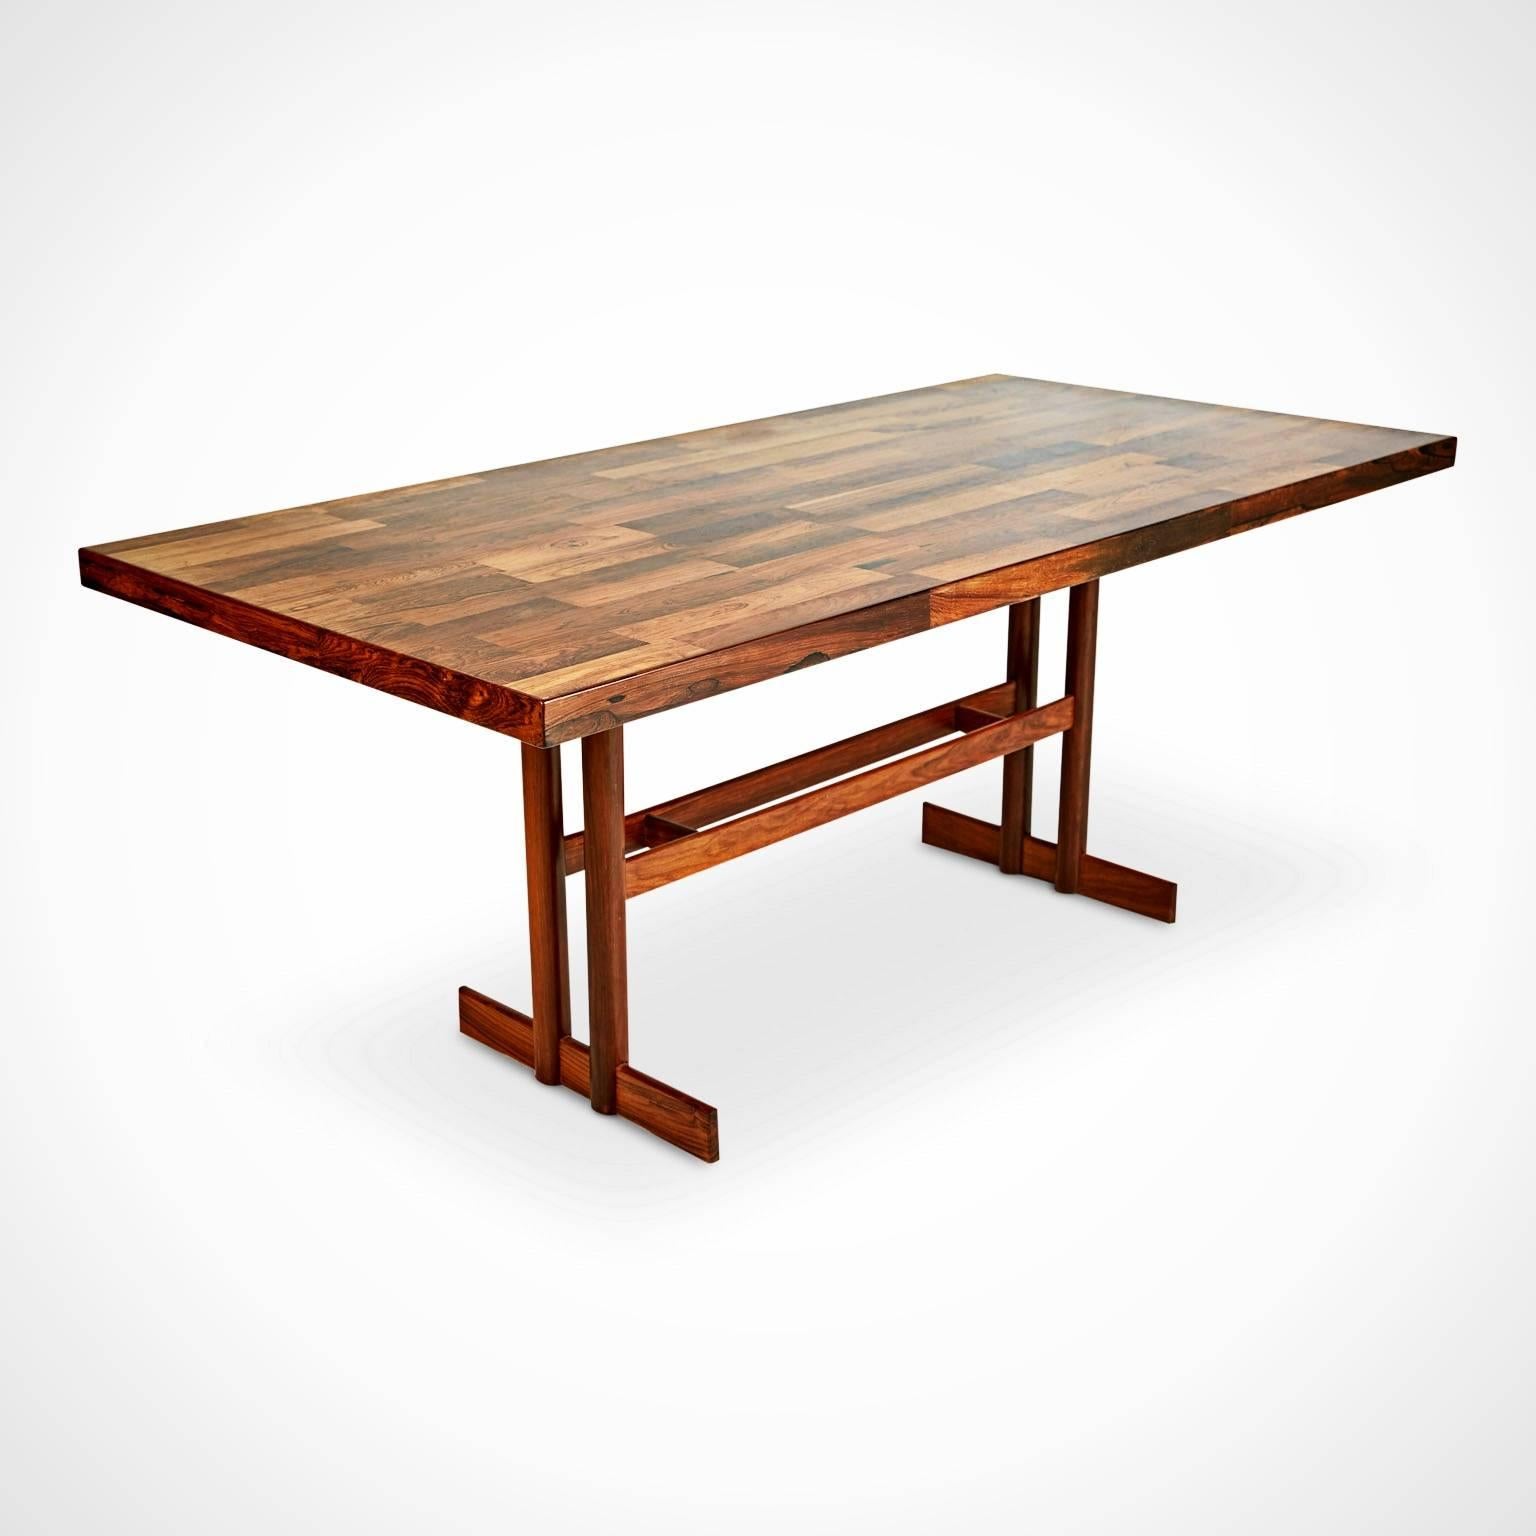 Expertly crafted Brazilian parquetry trestle table, possibly from Jorge Zalszupin, which has been recently restored. This striking dining table, which could also be used as a conference table or floating desk, is fabricated from solid rosewood with